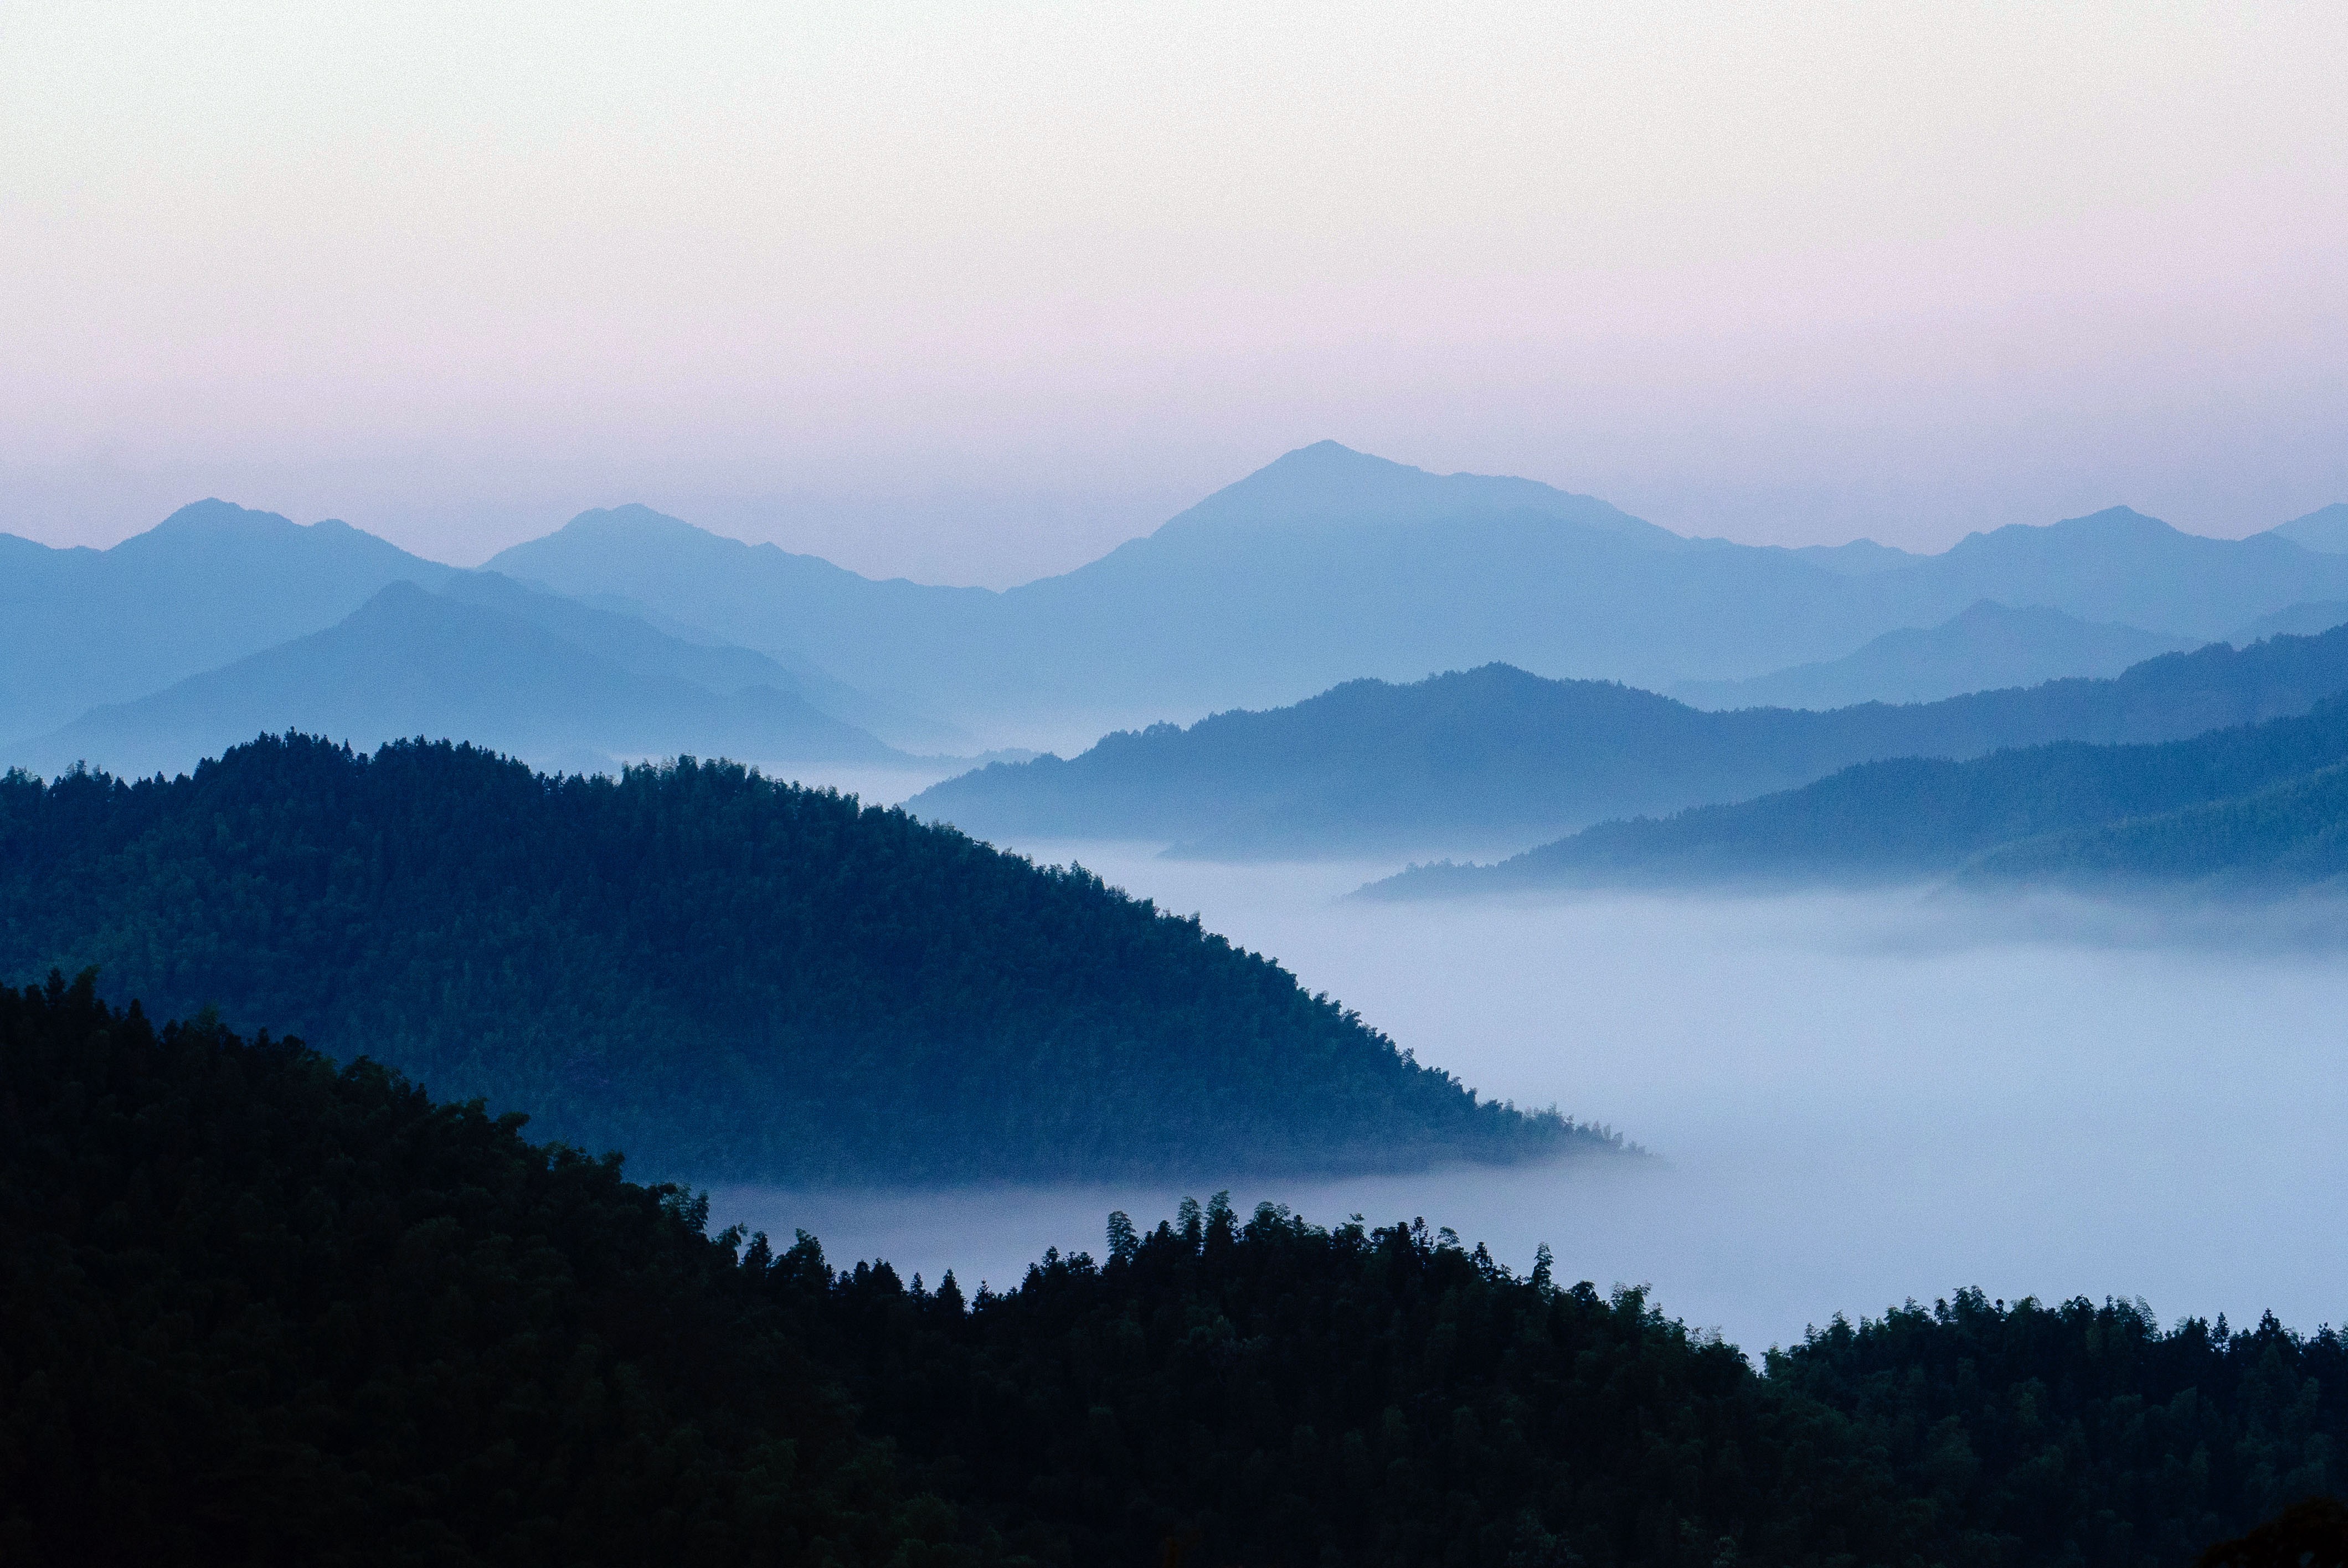 The early morning clouds of Anhui province. Photo: Ryan Pyle